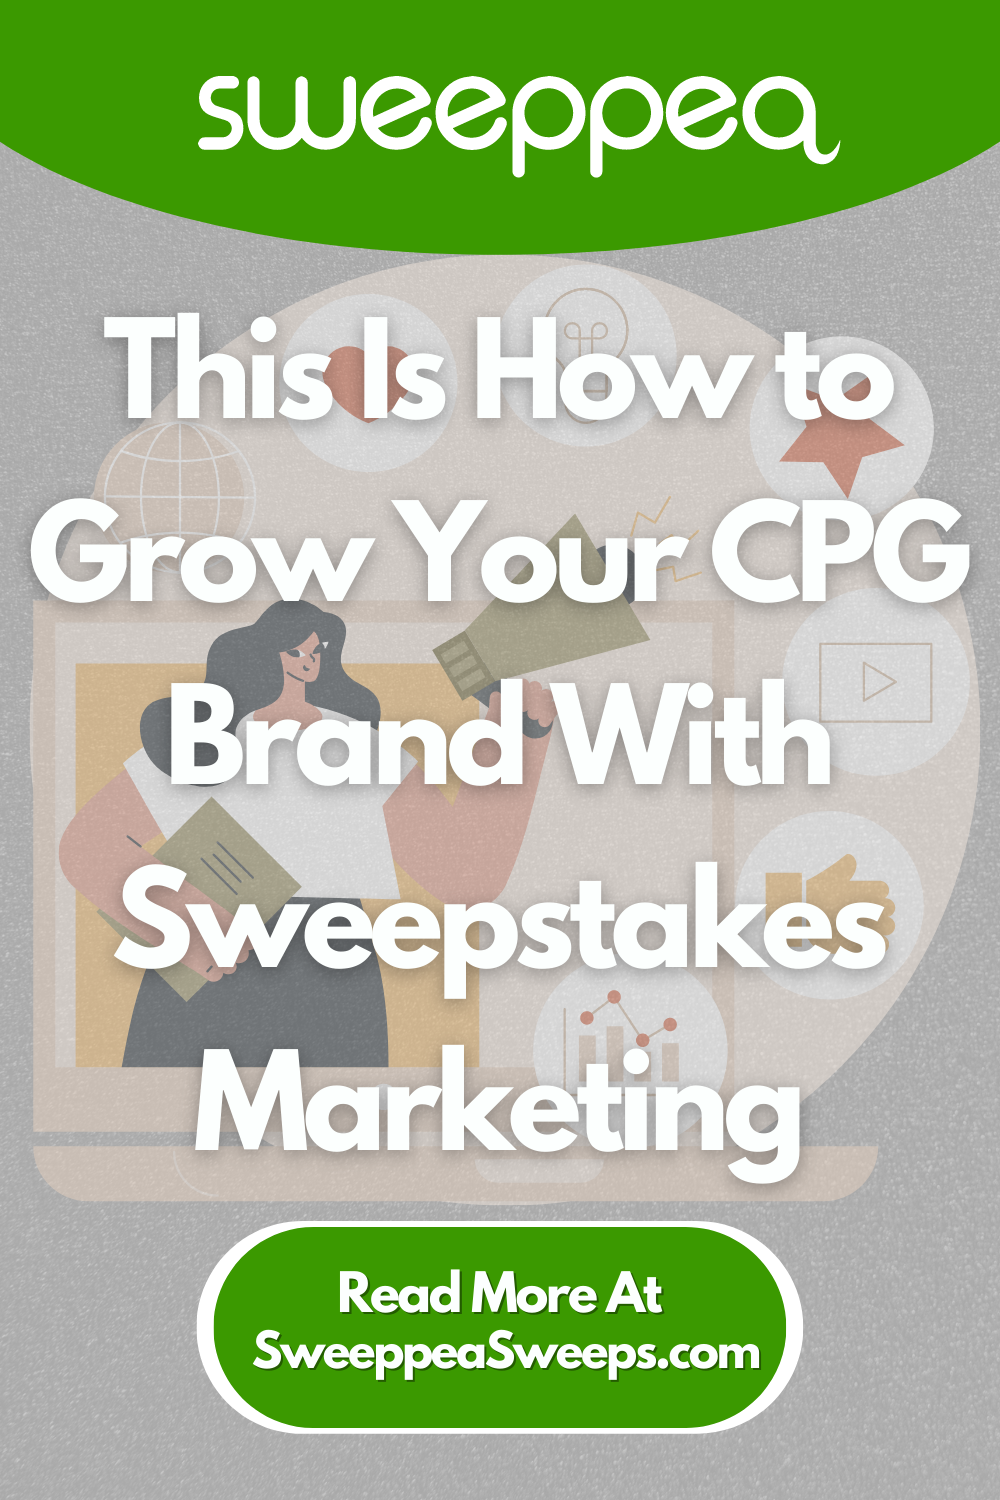 This Is How to Grow Your CPG Brand With Sweepstakes Marketing